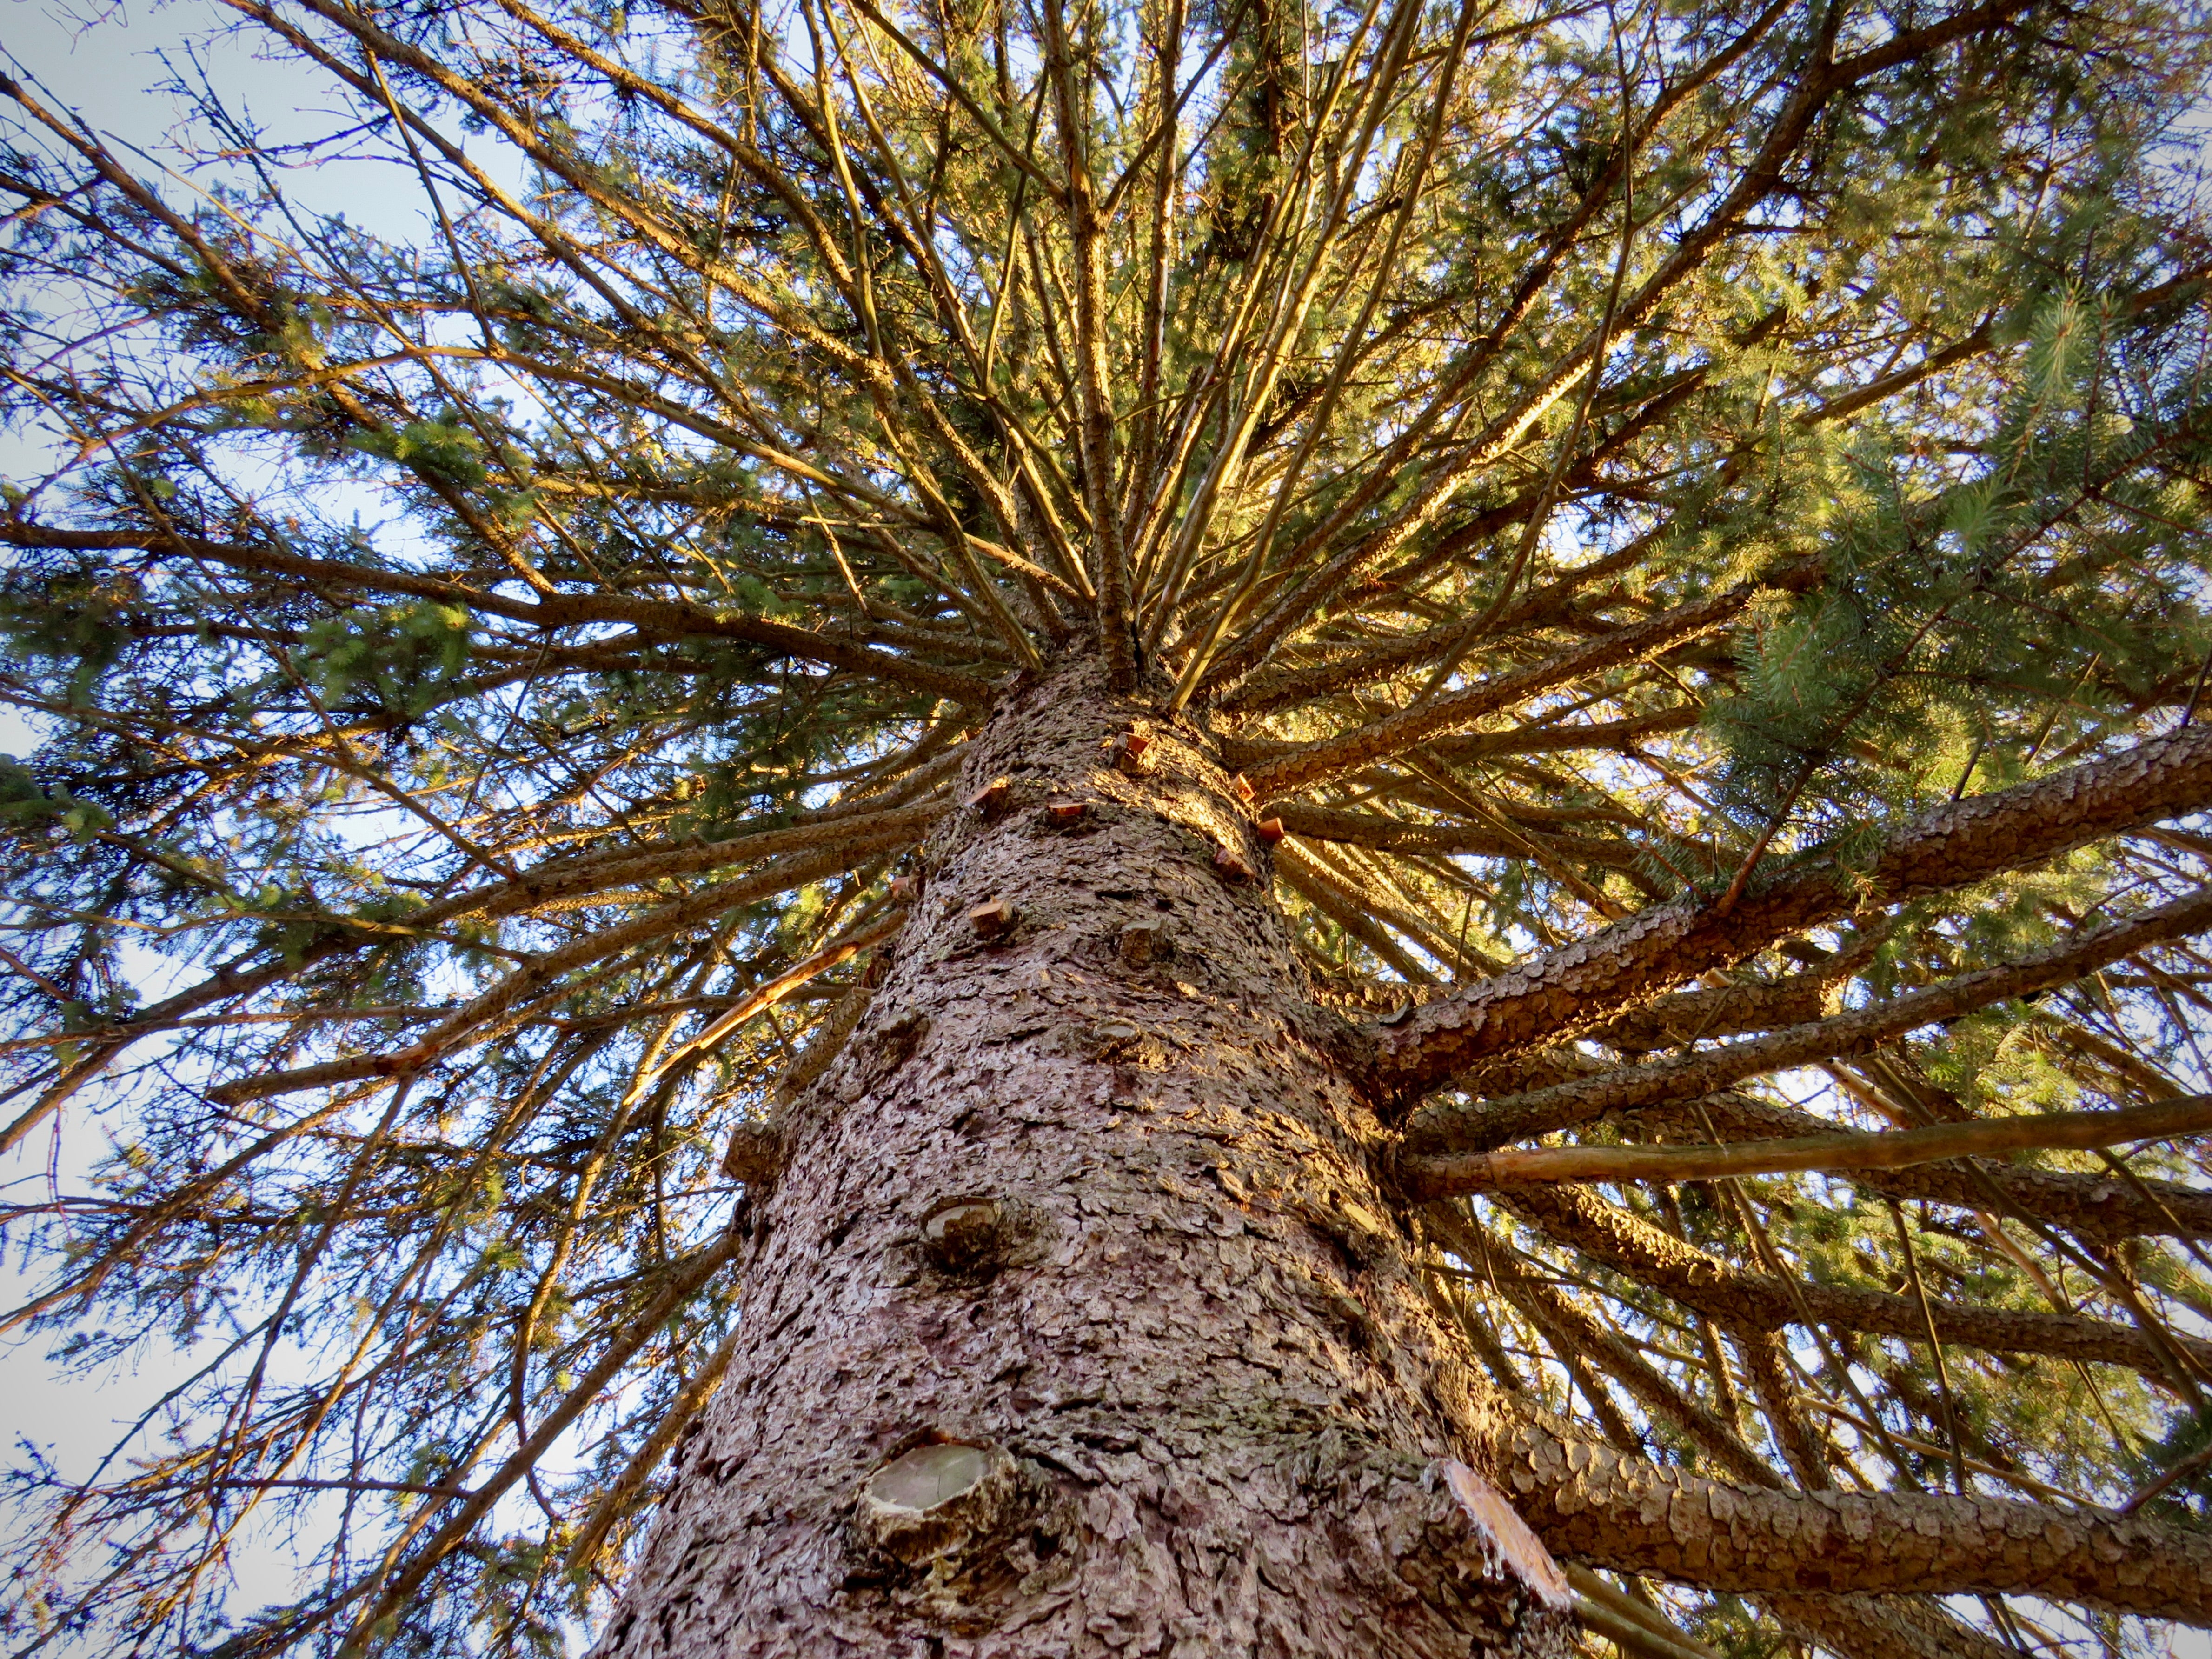 A pine tree from below view